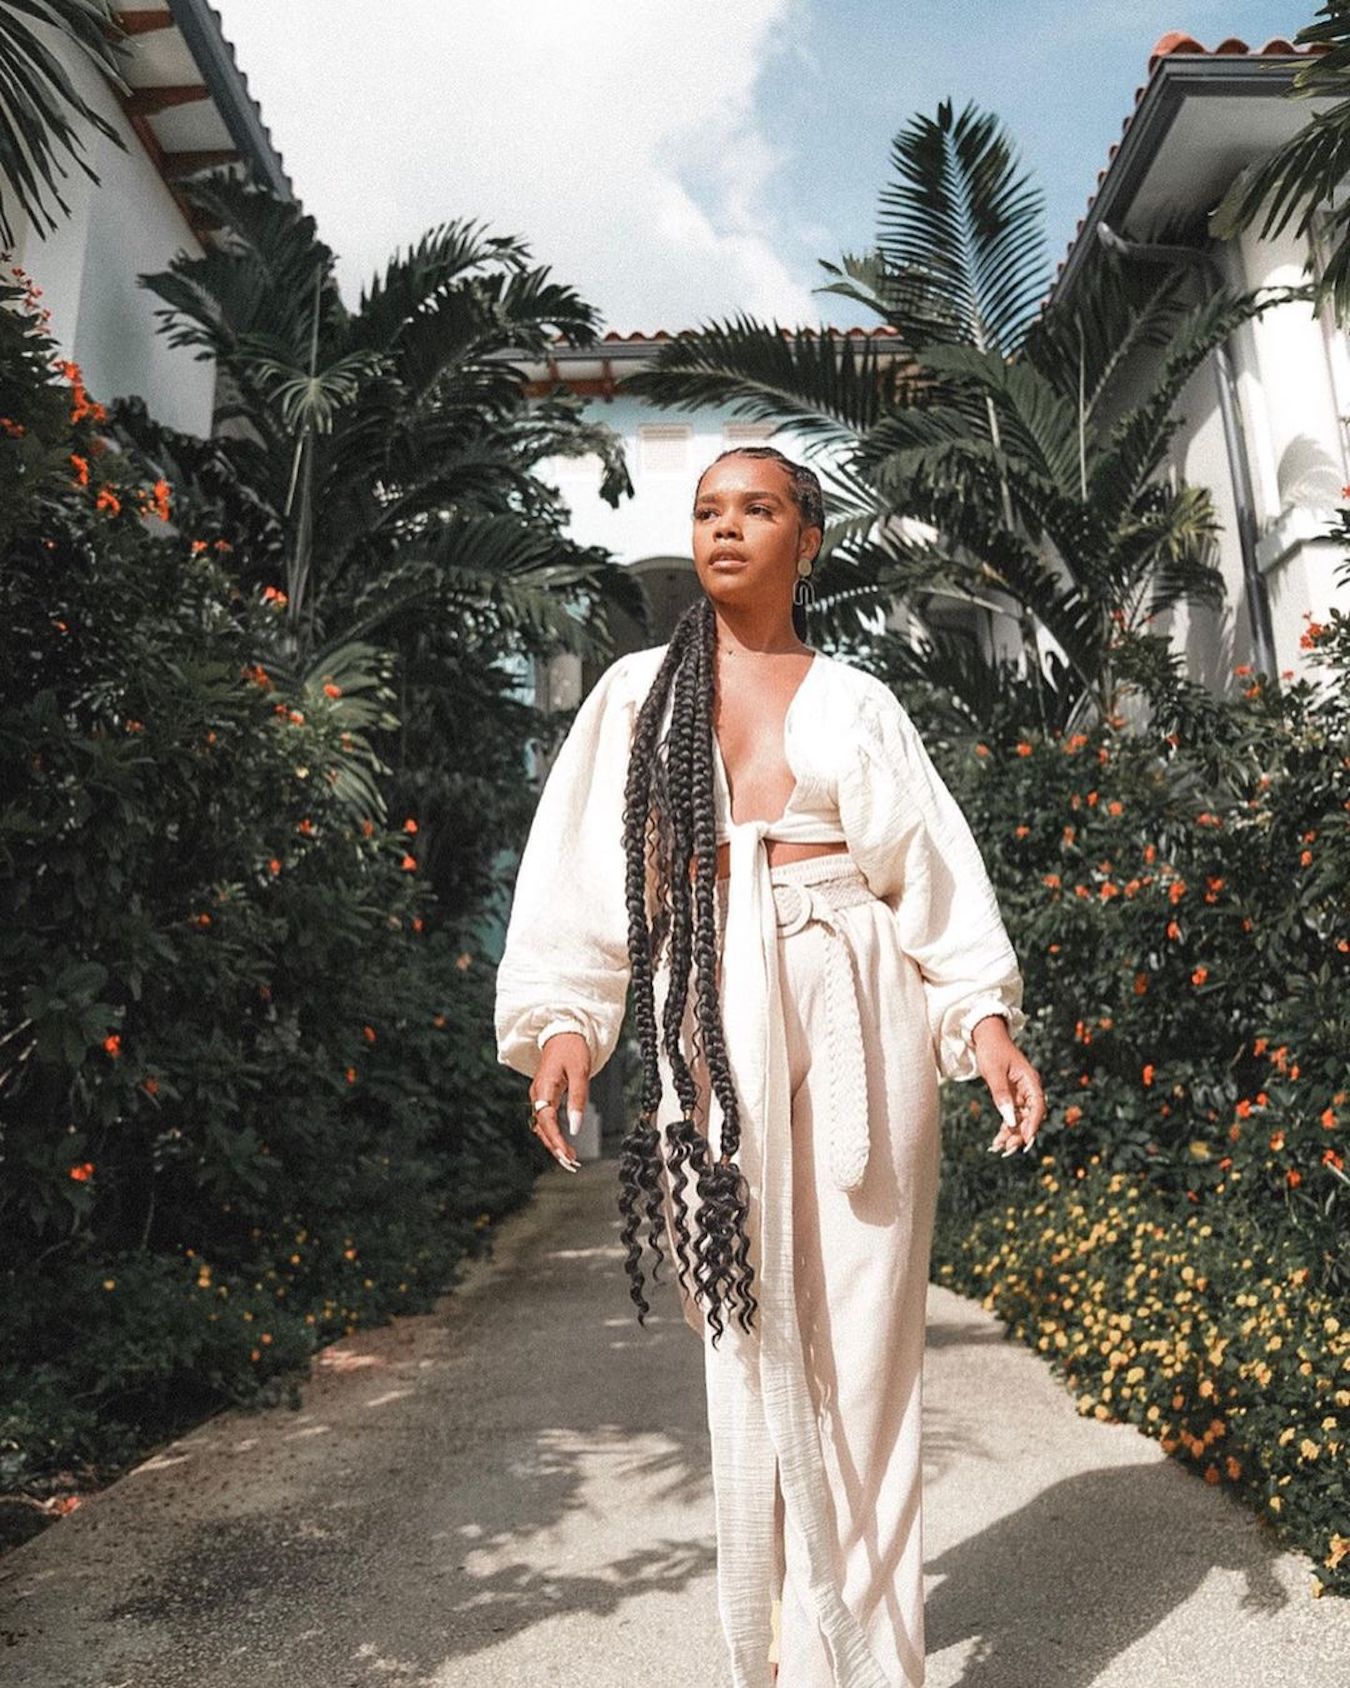 @skylarmarshai | The Best Lifestyle Influencers to follow in 2023